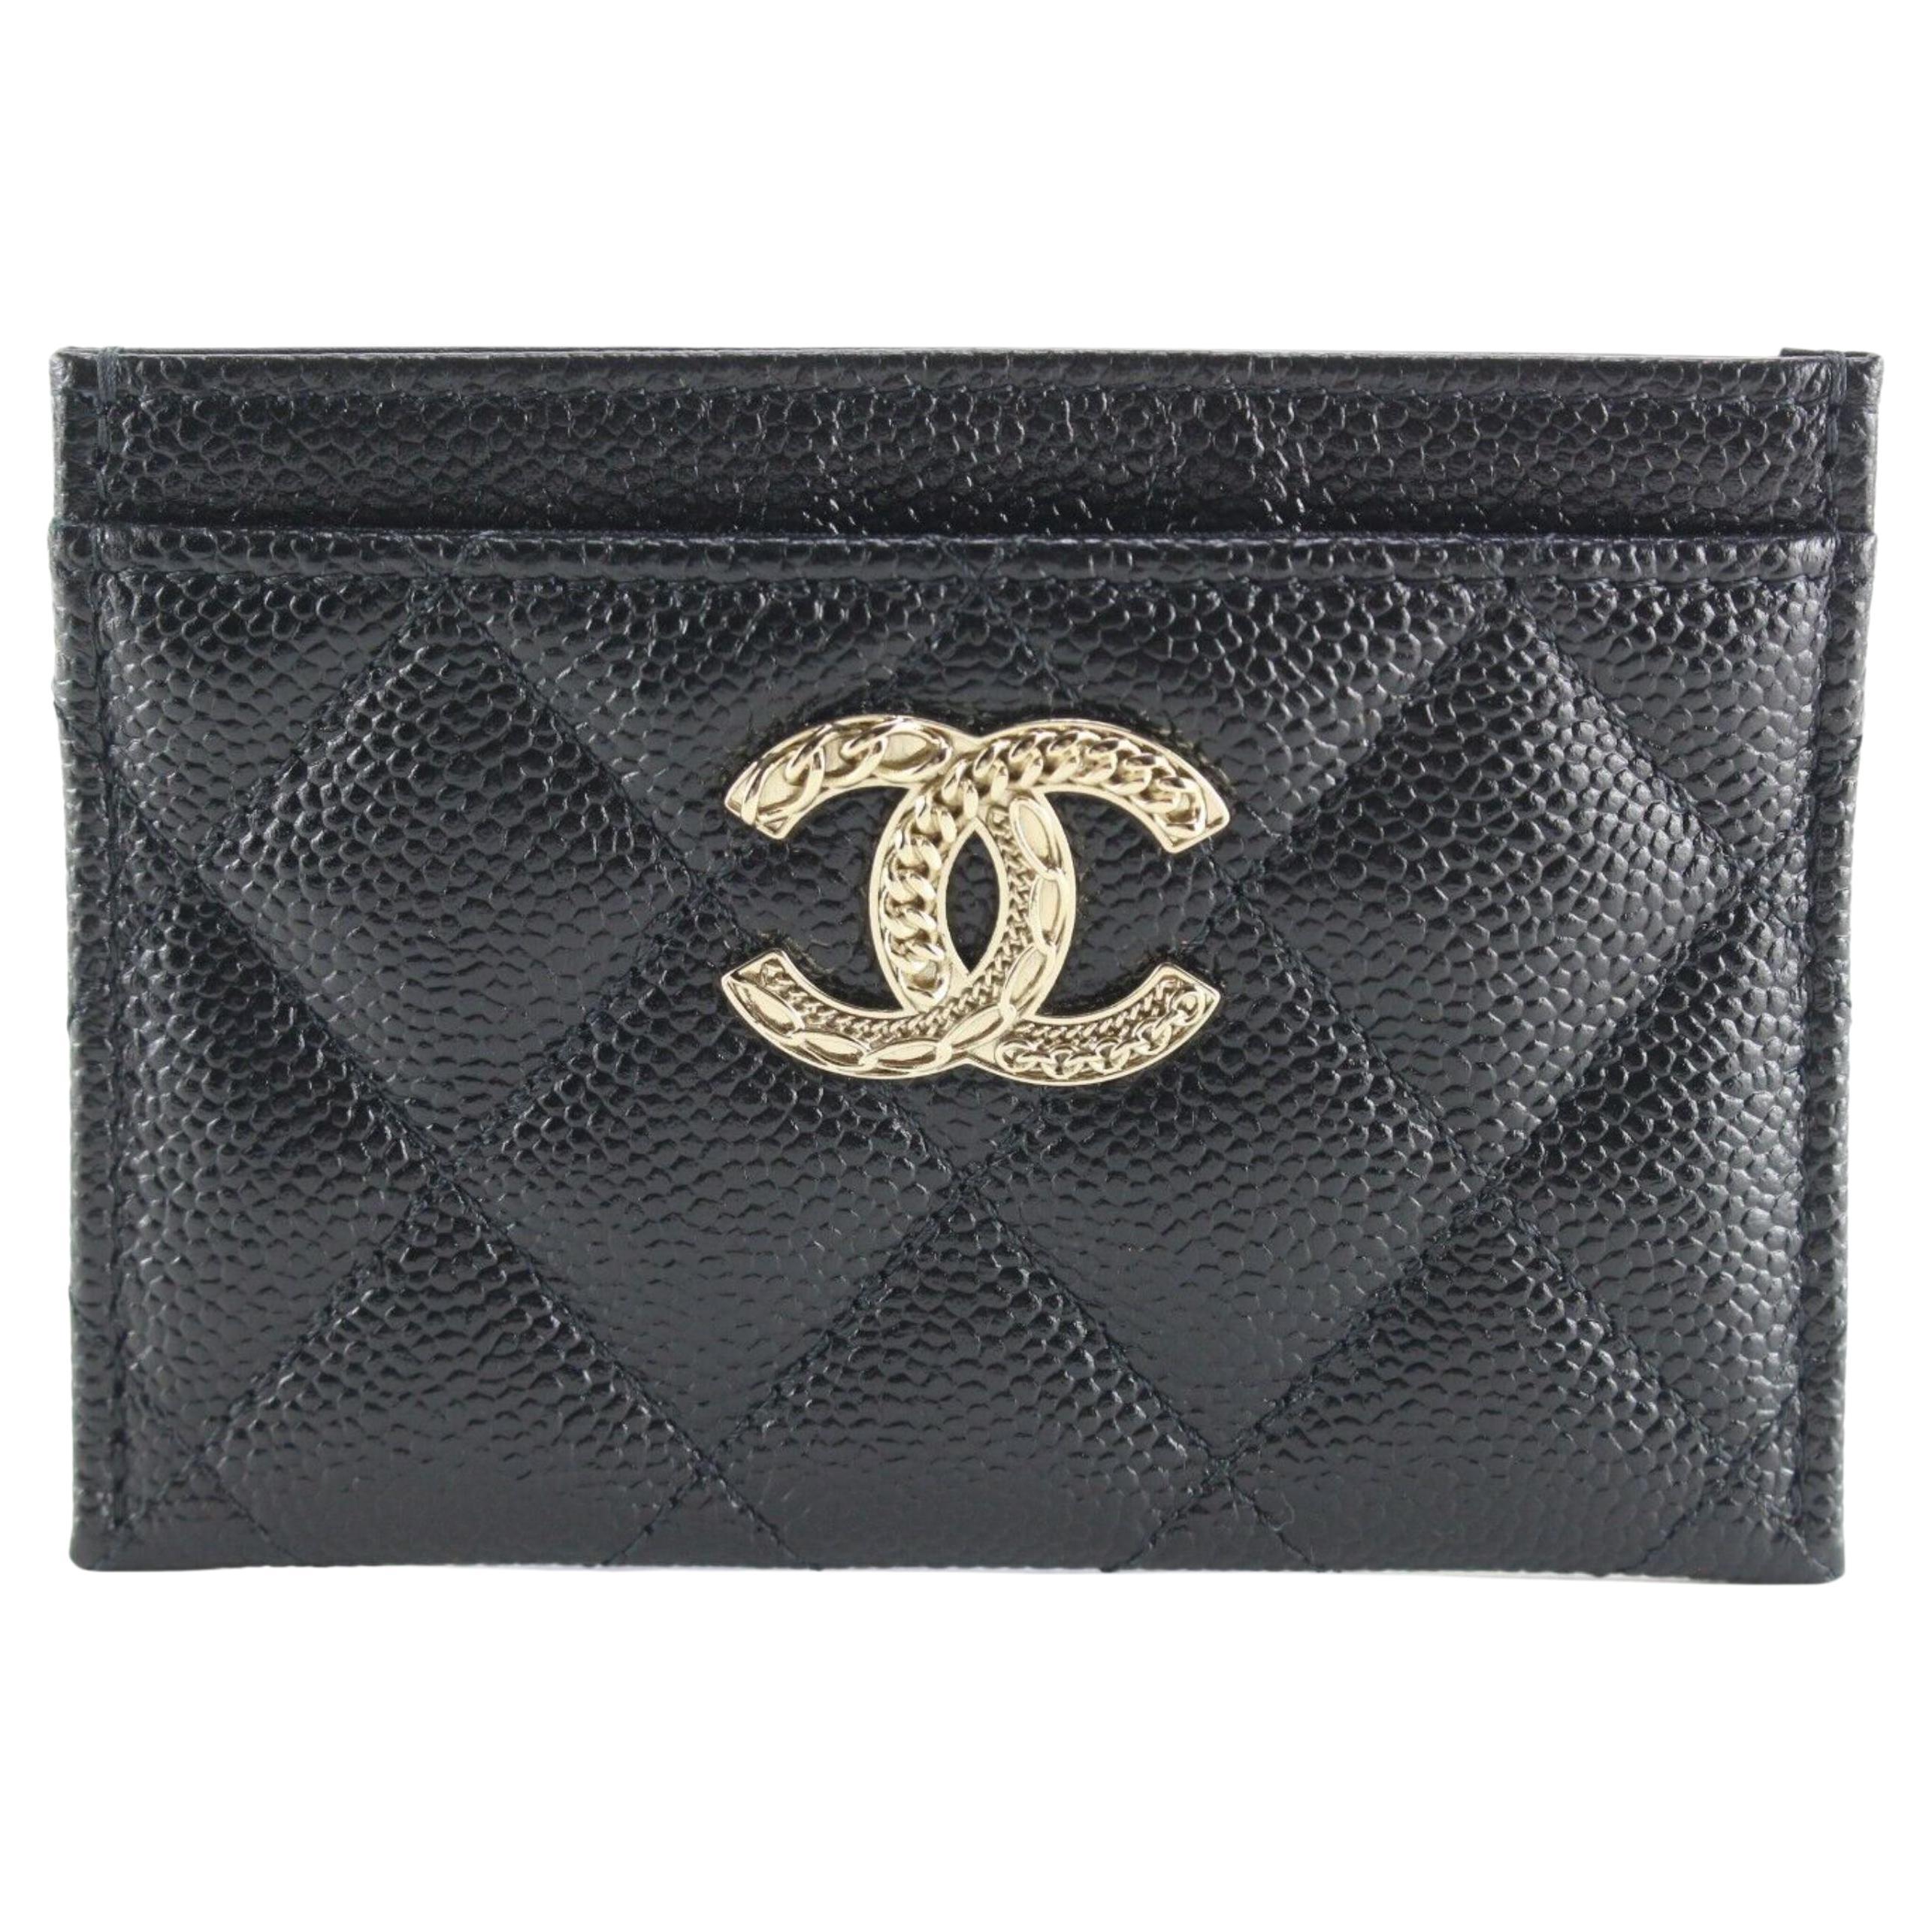 Chanel Black Quilted Caviar Card Holder 1CJ0216